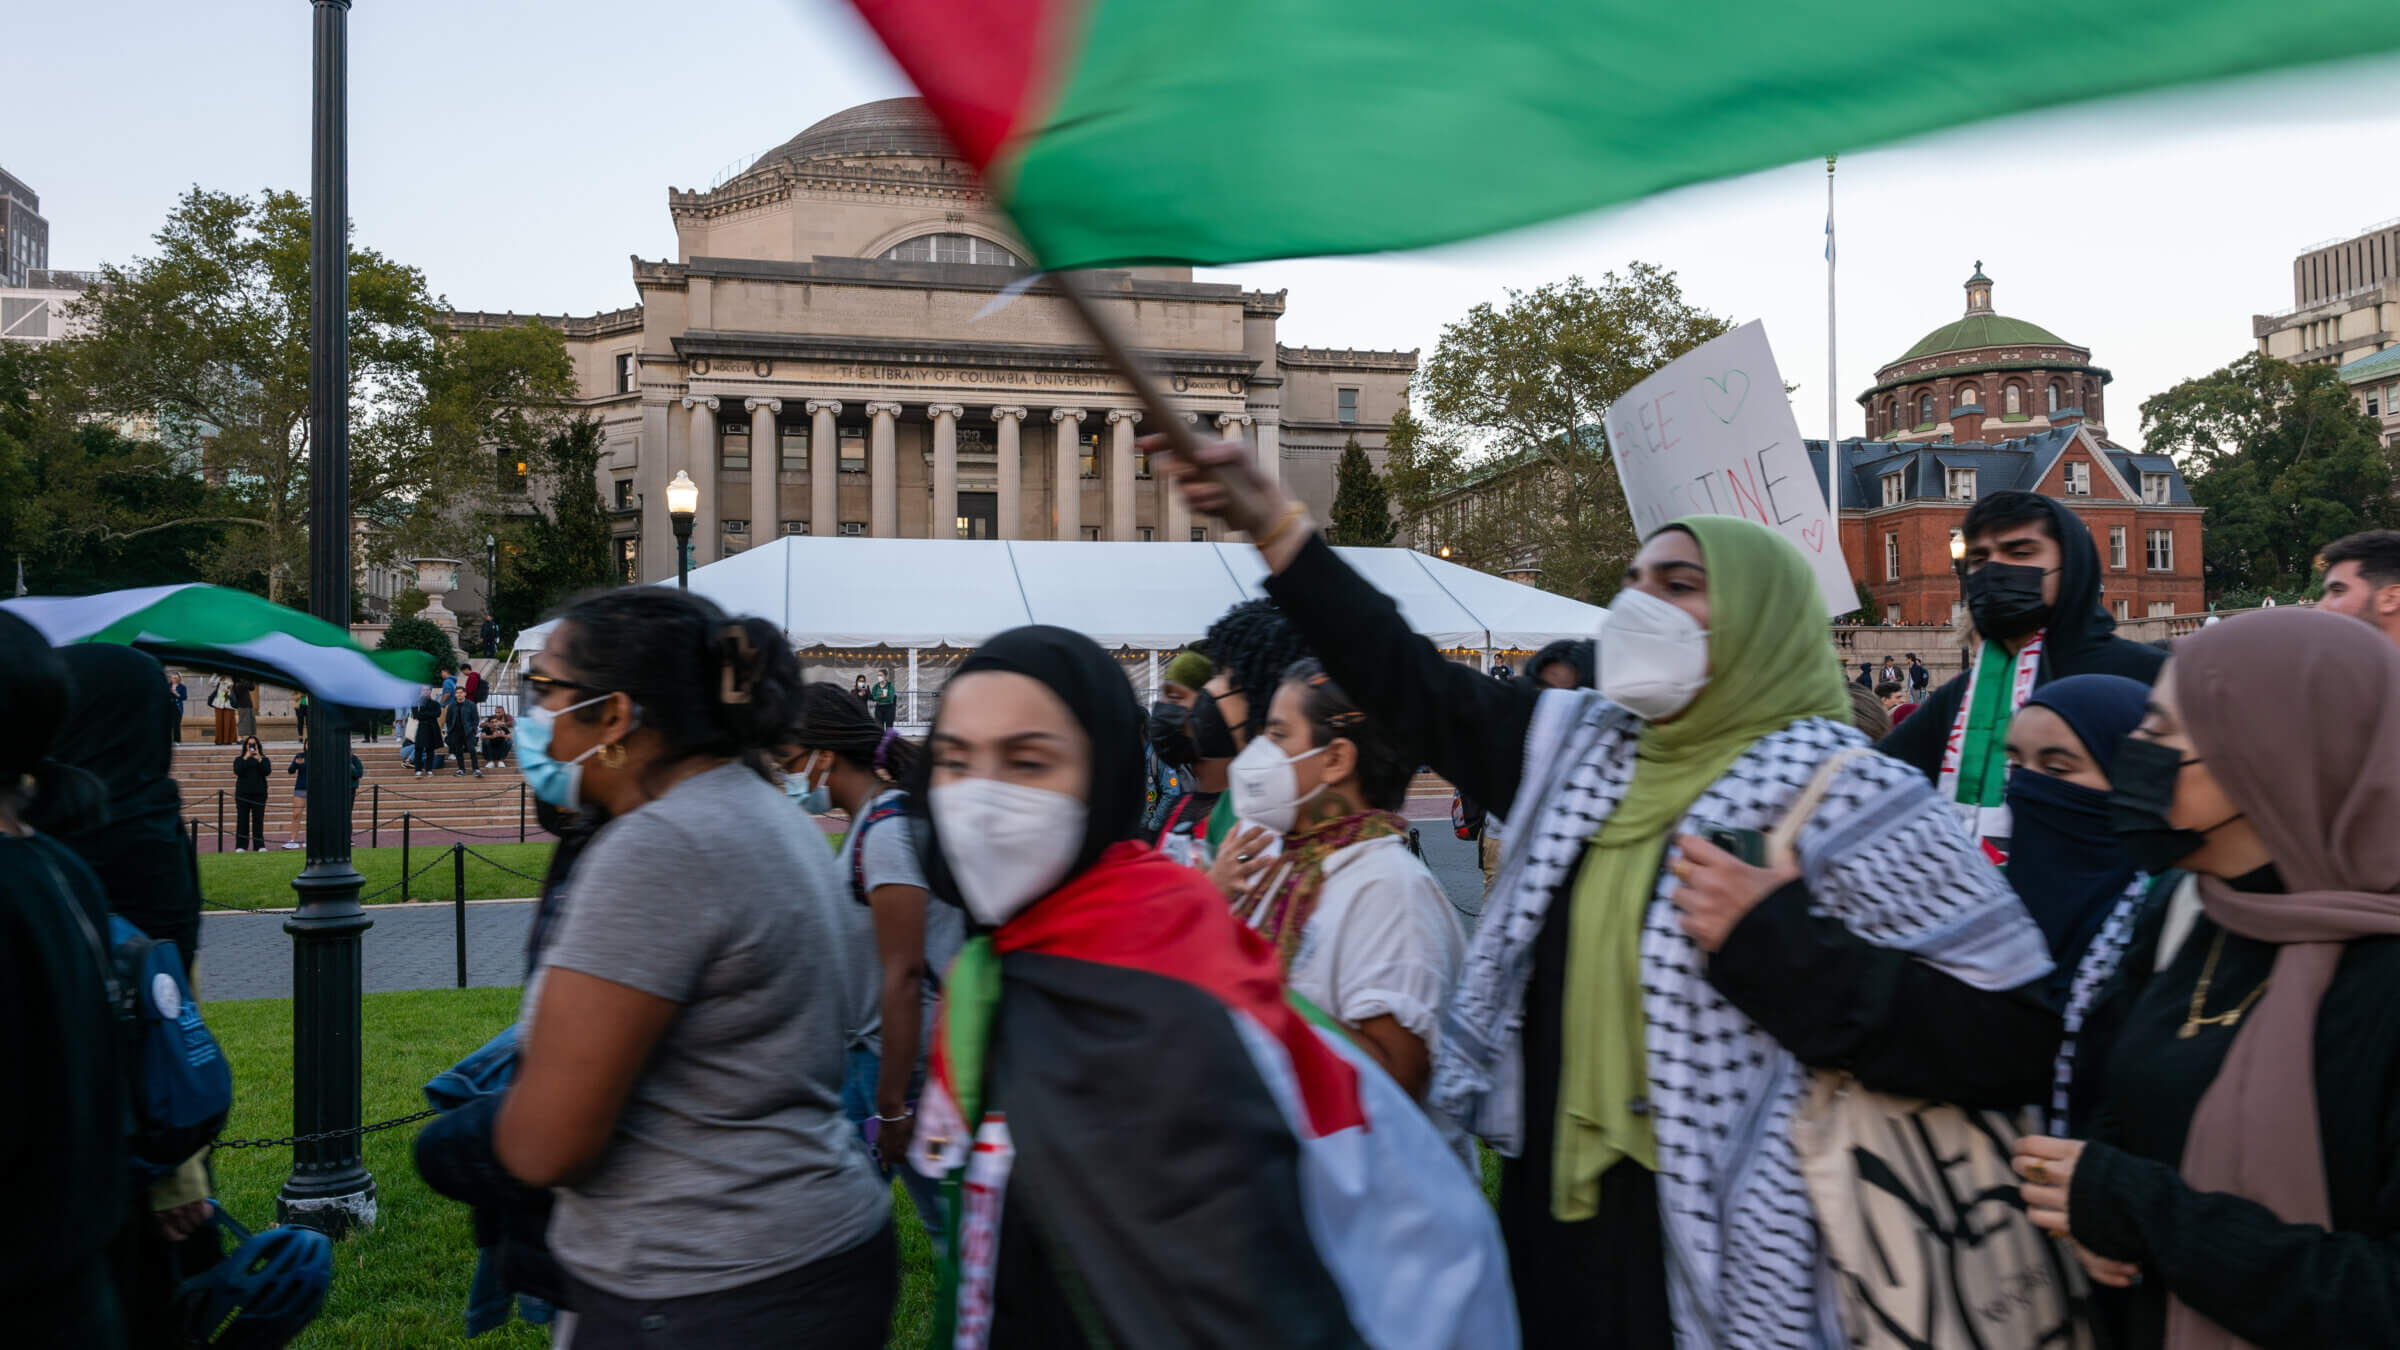 Columbia students participate in a rally at the university on October 12. The university banned two pro-Palestinian student clubs Friday, citing policy violations.